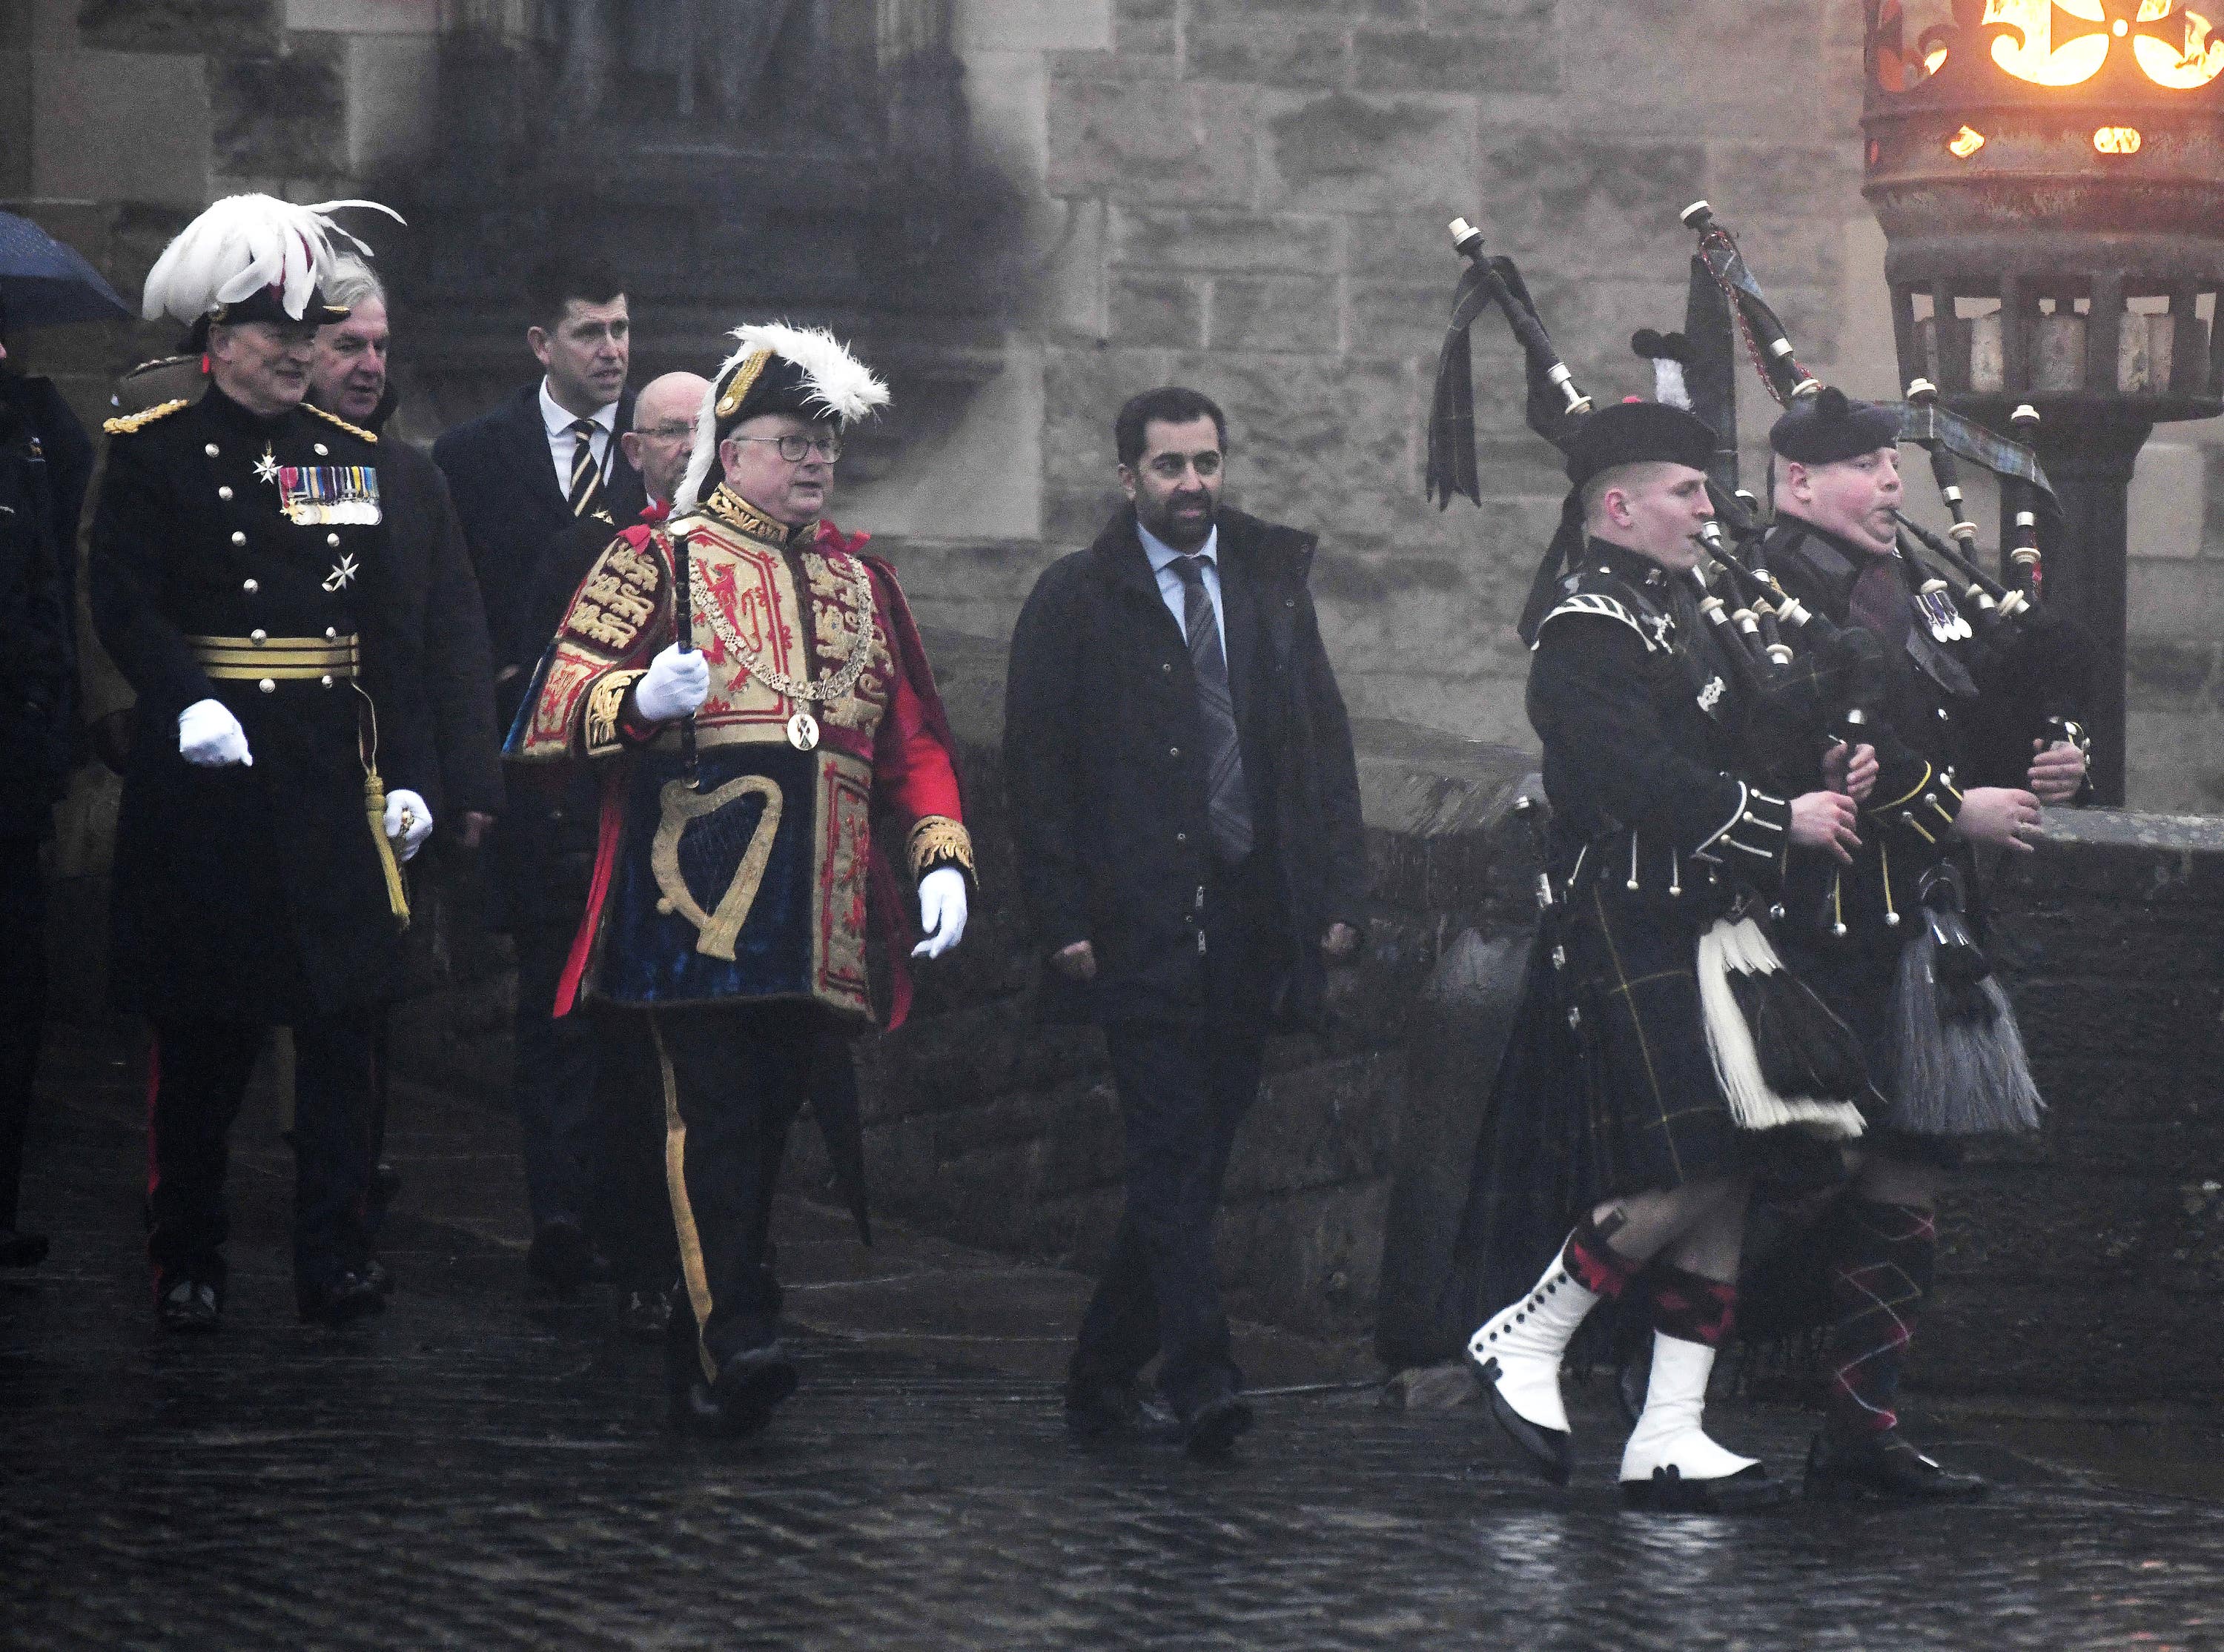 Humza Yousaf is one of the Commissioners for the Safeguarding of the Regalia.